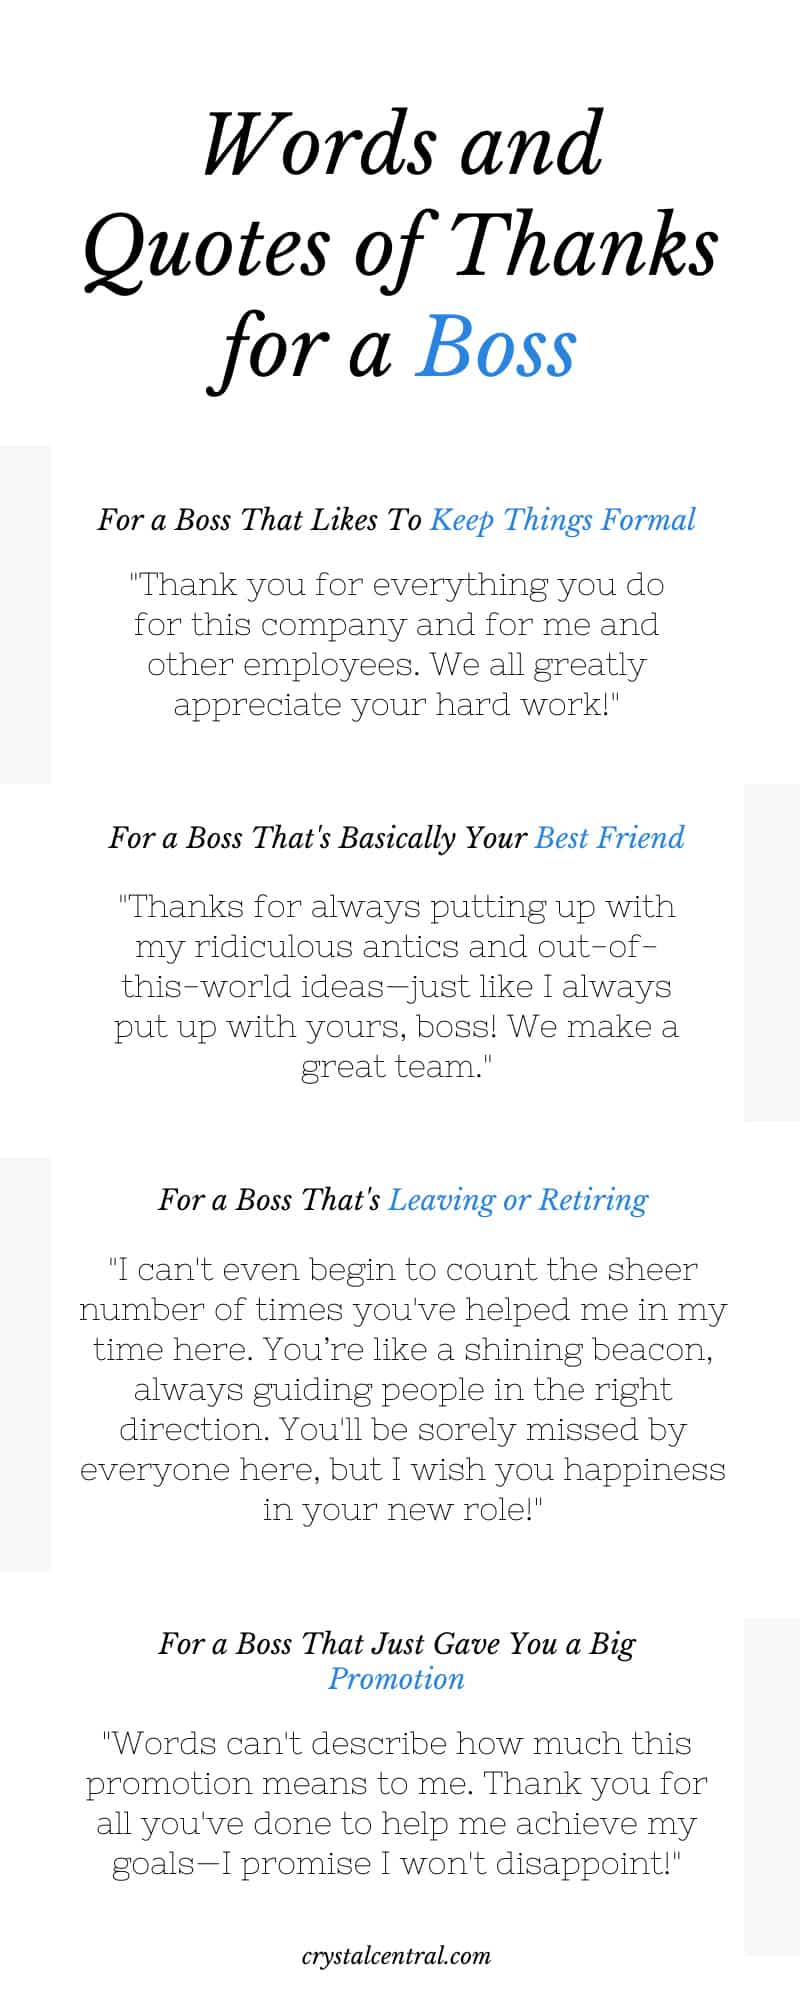 Words and Quotes of Thanks a Boss